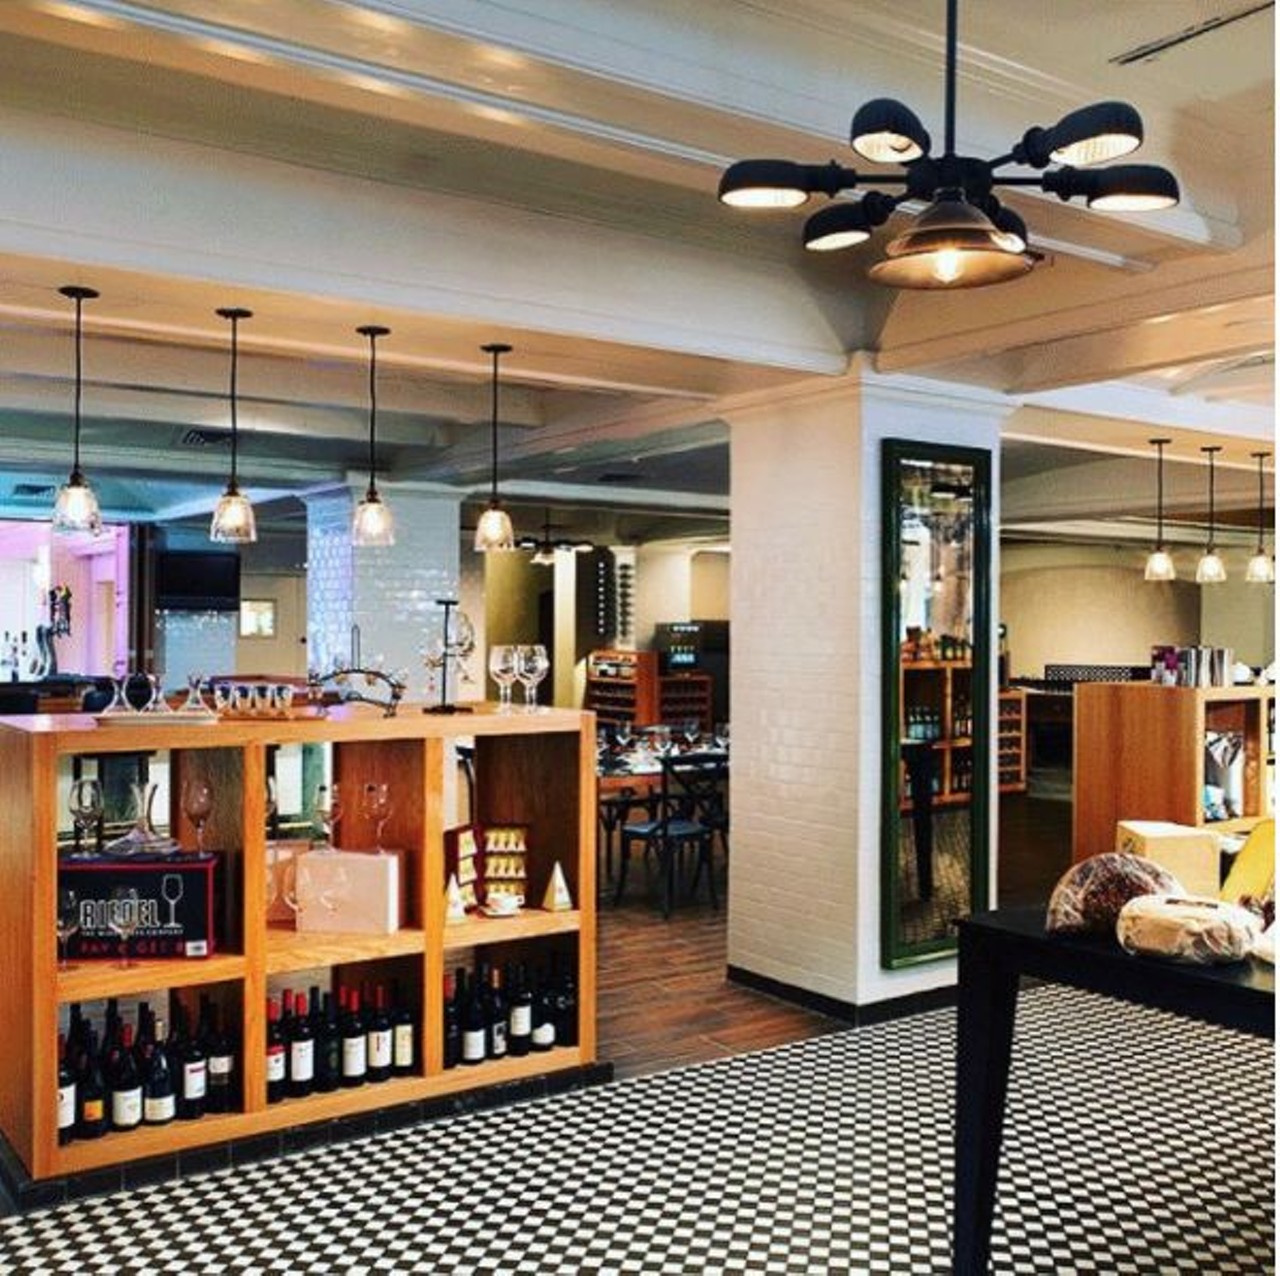 Market on Houston at Sheraton Downtown
205 E Houston St., (210) 554-1721
The Market on Houston is simple, modern and offers one of the largest wine menus in the downtown area.
Photo via Instagram, marketonhouston